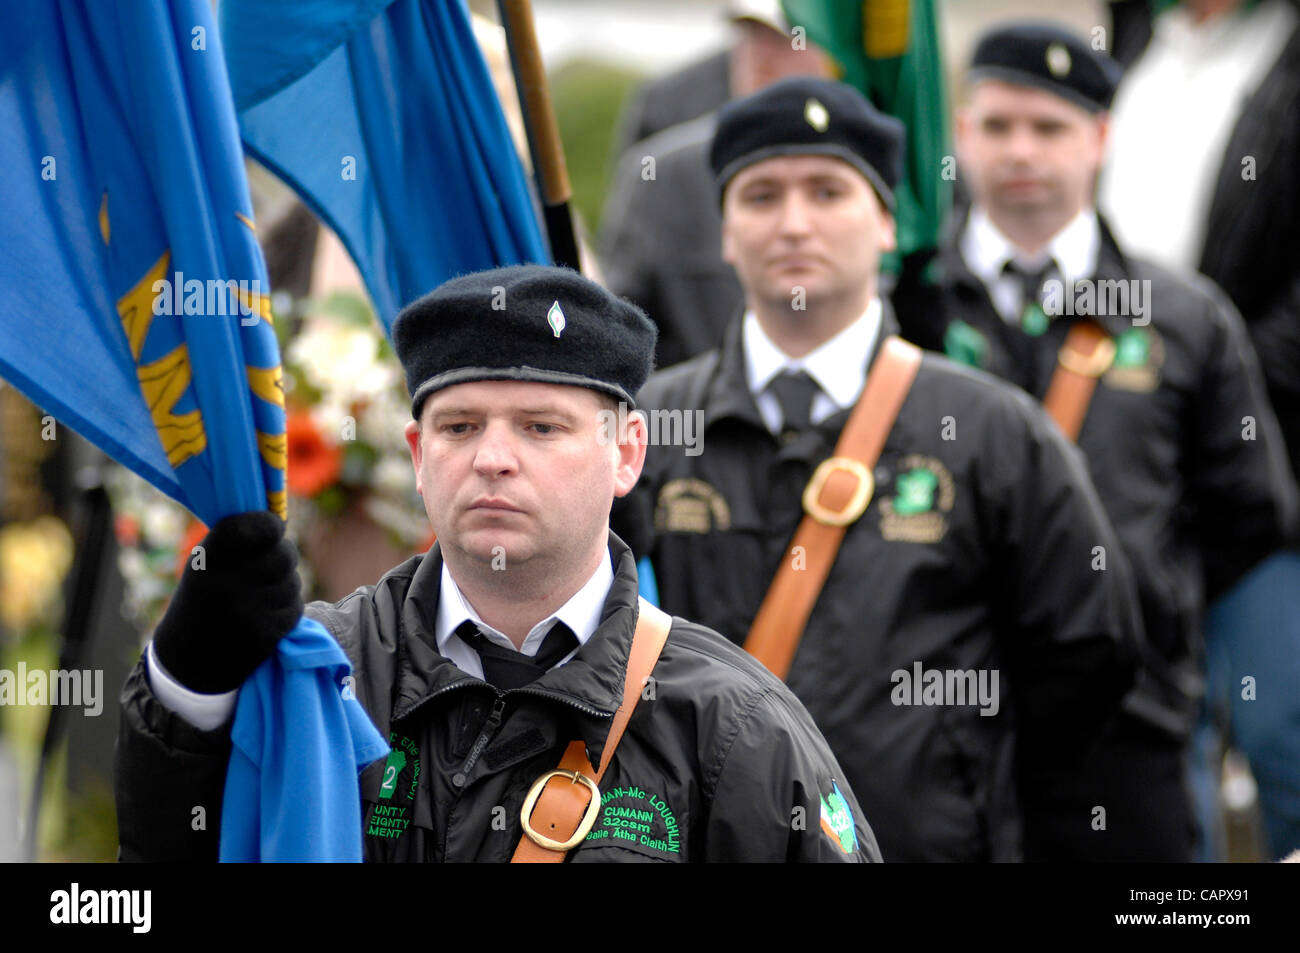 April 09, 2012 - Londonderry, Northern Ireland, UK - A colour party leads the dissident republican 32 County Sovereignty Movement's commemoration of the 1916 Easter Rising at the City Cemetery. Stock Photo